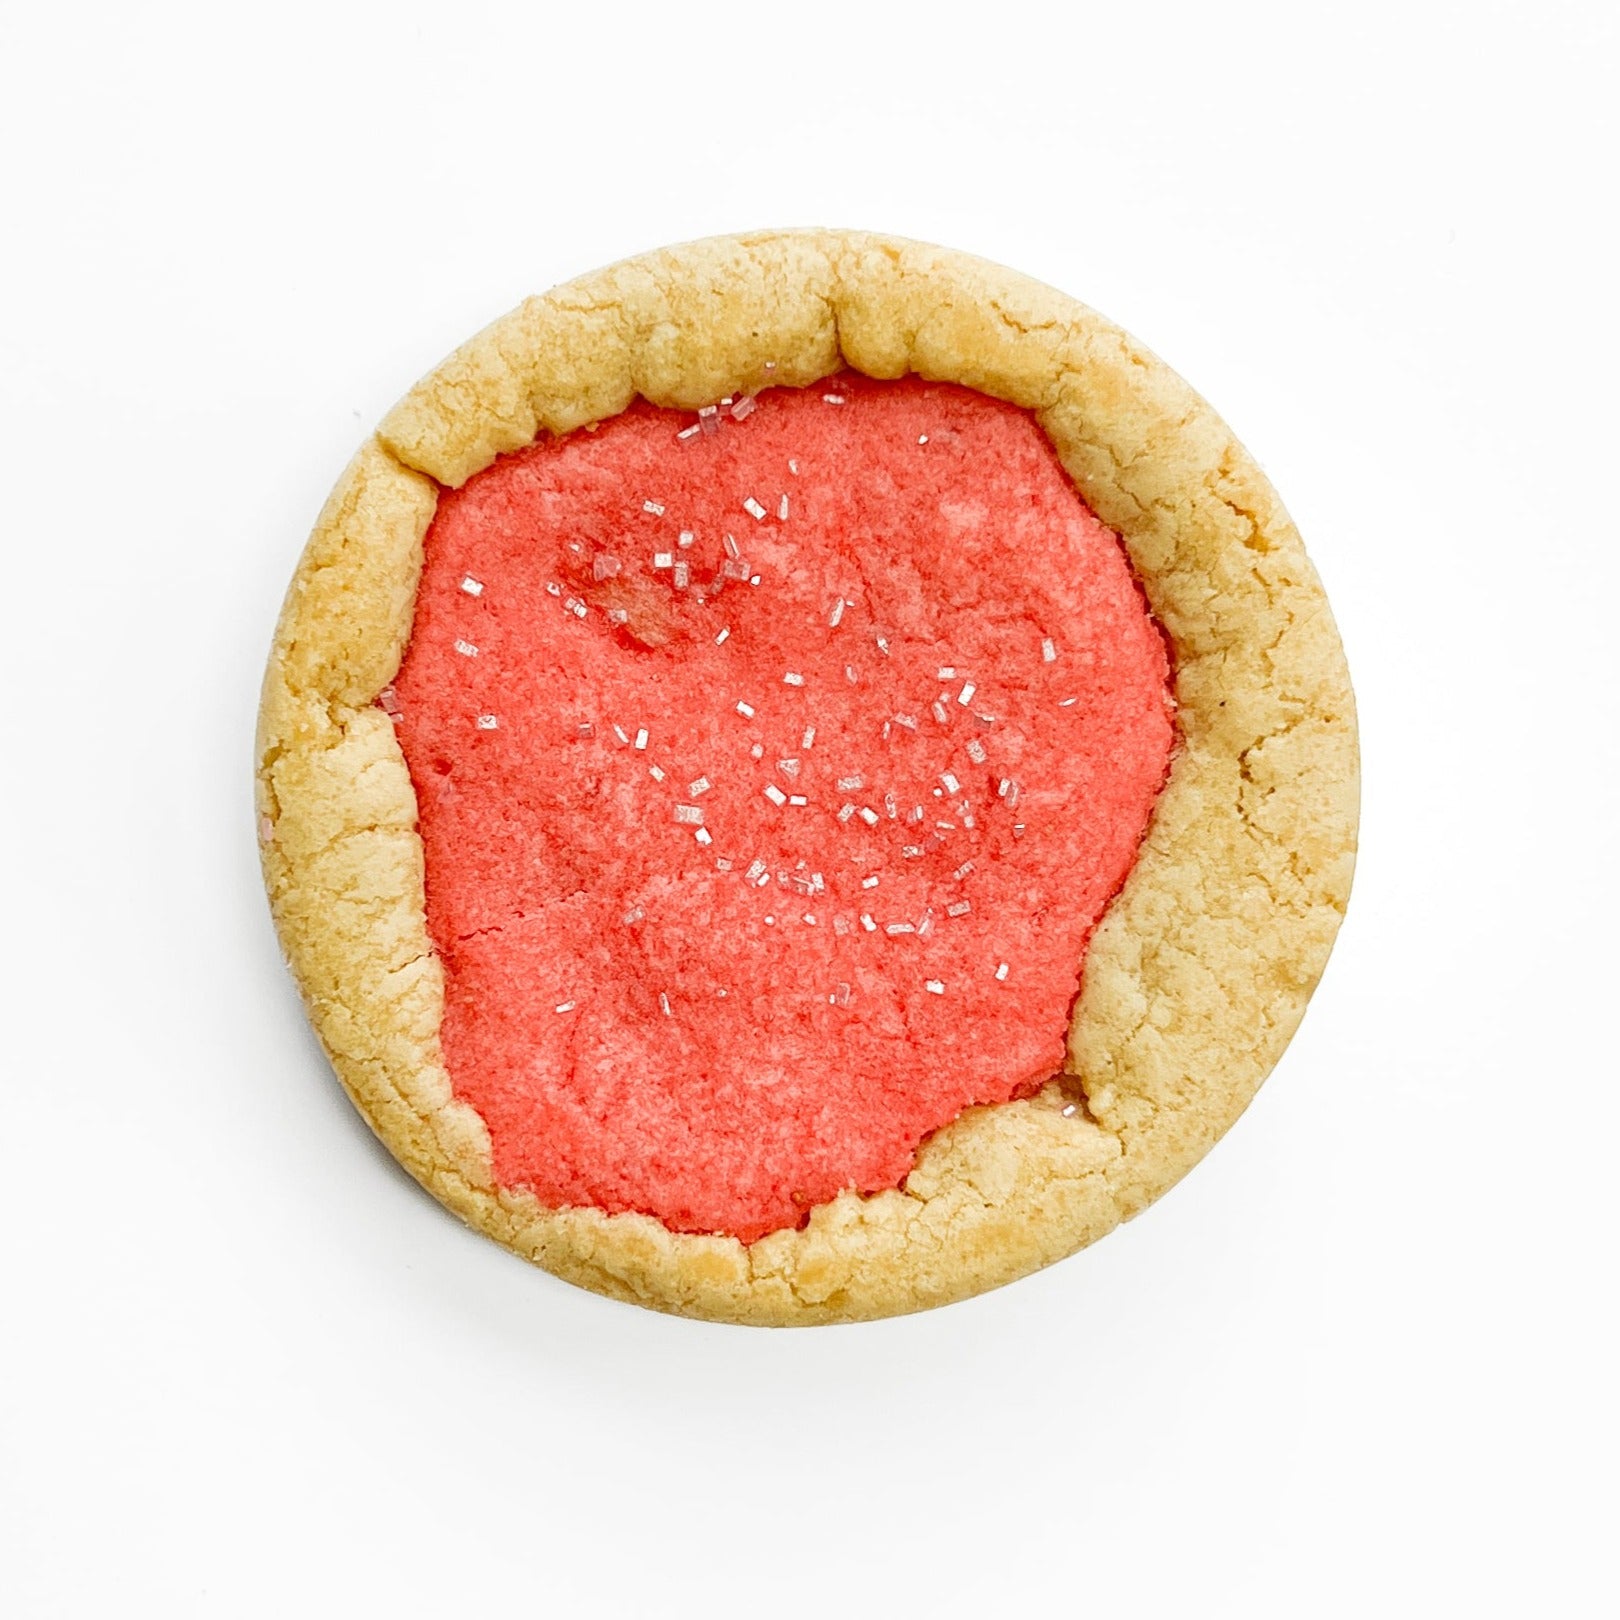 Strawberry tart stuffed cookie from above